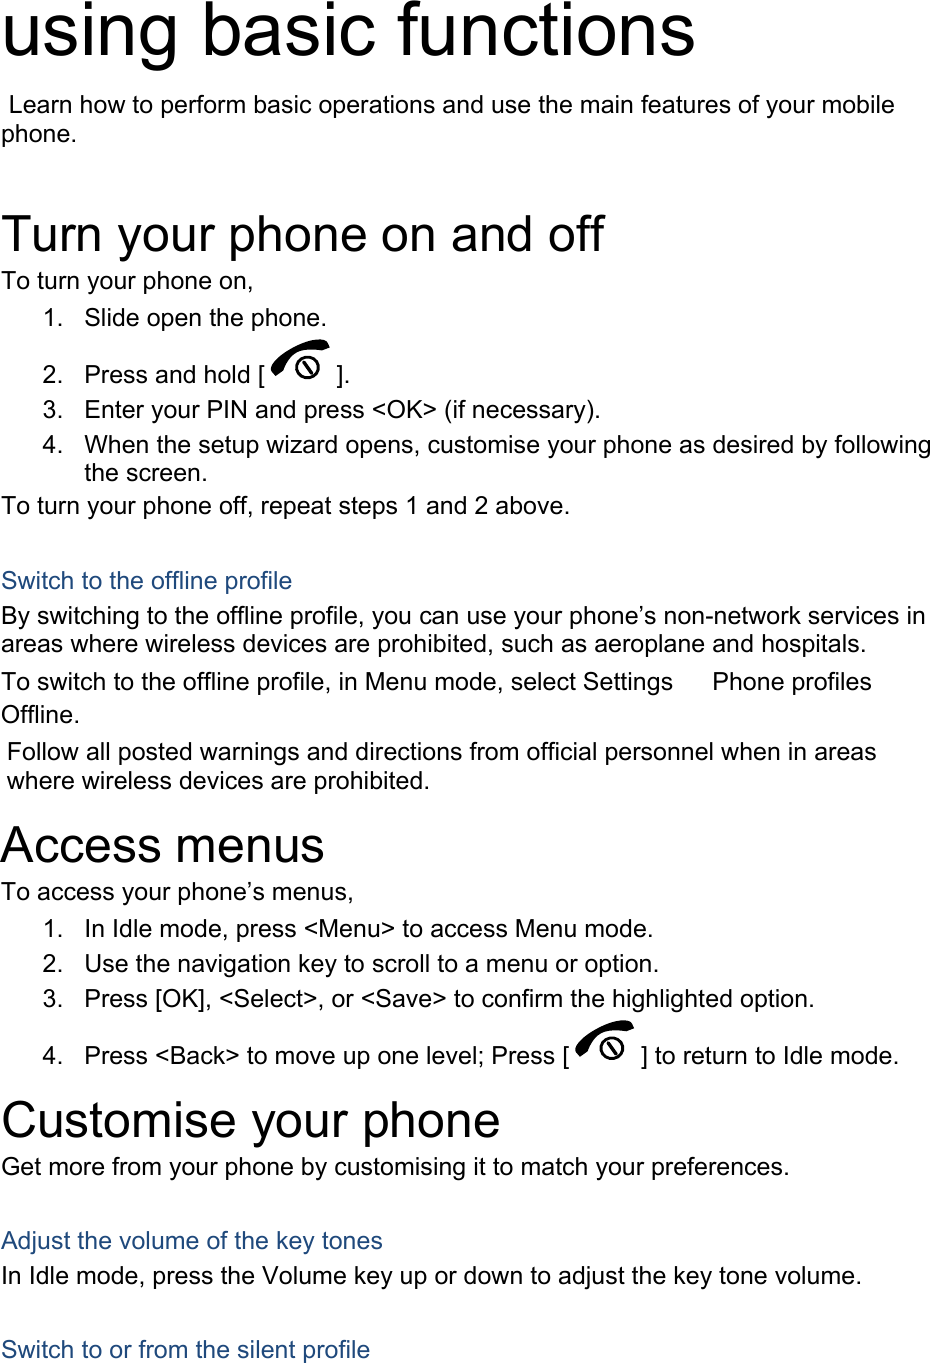  using basic functions  Learn how to perform basic operations and use the main features of your mobile phone.   Turn your phone on and off To turn your phone on, 1.  Slide open the phone. 2.  Press and hold [ ]. 3.  Enter your PIN and press &lt;OK&gt; (if necessary). 4.  When the setup wizard opens, customise your phone as desired by following the screen. To turn your phone off, repeat steps 1 and 2 above.  Switch to the offline profile By switching to the offline profile, you can use your phone’s non-network services in areas where wireless devices are prohibited, such as aeroplane and hospitals. To switch to the offline profile, in Menu mode, select Settings 　 Phone profiles 　 Offline. Follow all posted warnings and directions from official personnel when in areas where wireless devices are prohibited. Access menus To access your phone’s menus, 1.  In Idle mode, press &lt;Menu&gt; to access Menu mode. 2.  Use the navigation key to scroll to a menu or option. 3.  Press [OK], &lt;Select&gt;, or &lt;Save&gt; to confirm the highlighted option. 4.  Press &lt;Back&gt; to move up one level; Press [ ] to return to Idle mode. Customise your phone Get more from your phone by customising it to match your preferences.  Adjust the volume of the key tones In Idle mode, press the Volume key up or down to adjust the key tone volume.  Switch to or from the silent profile 